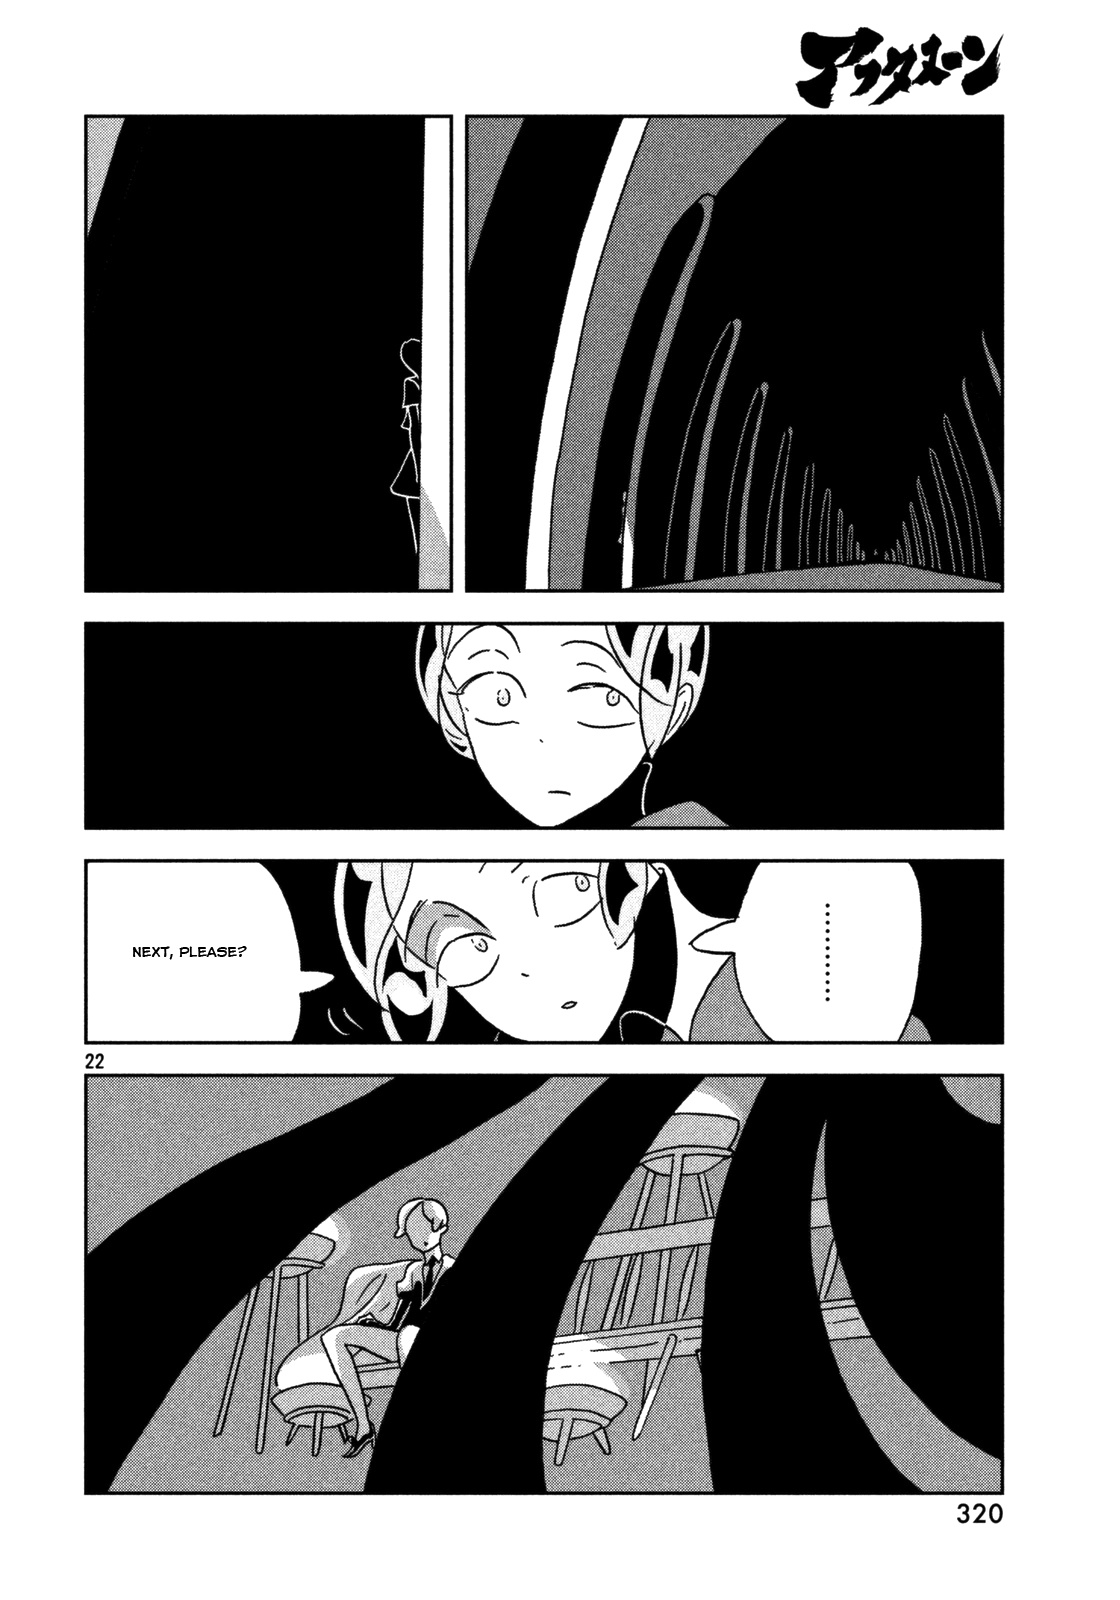 Land of the Lustrous, Chapter 22 image 22